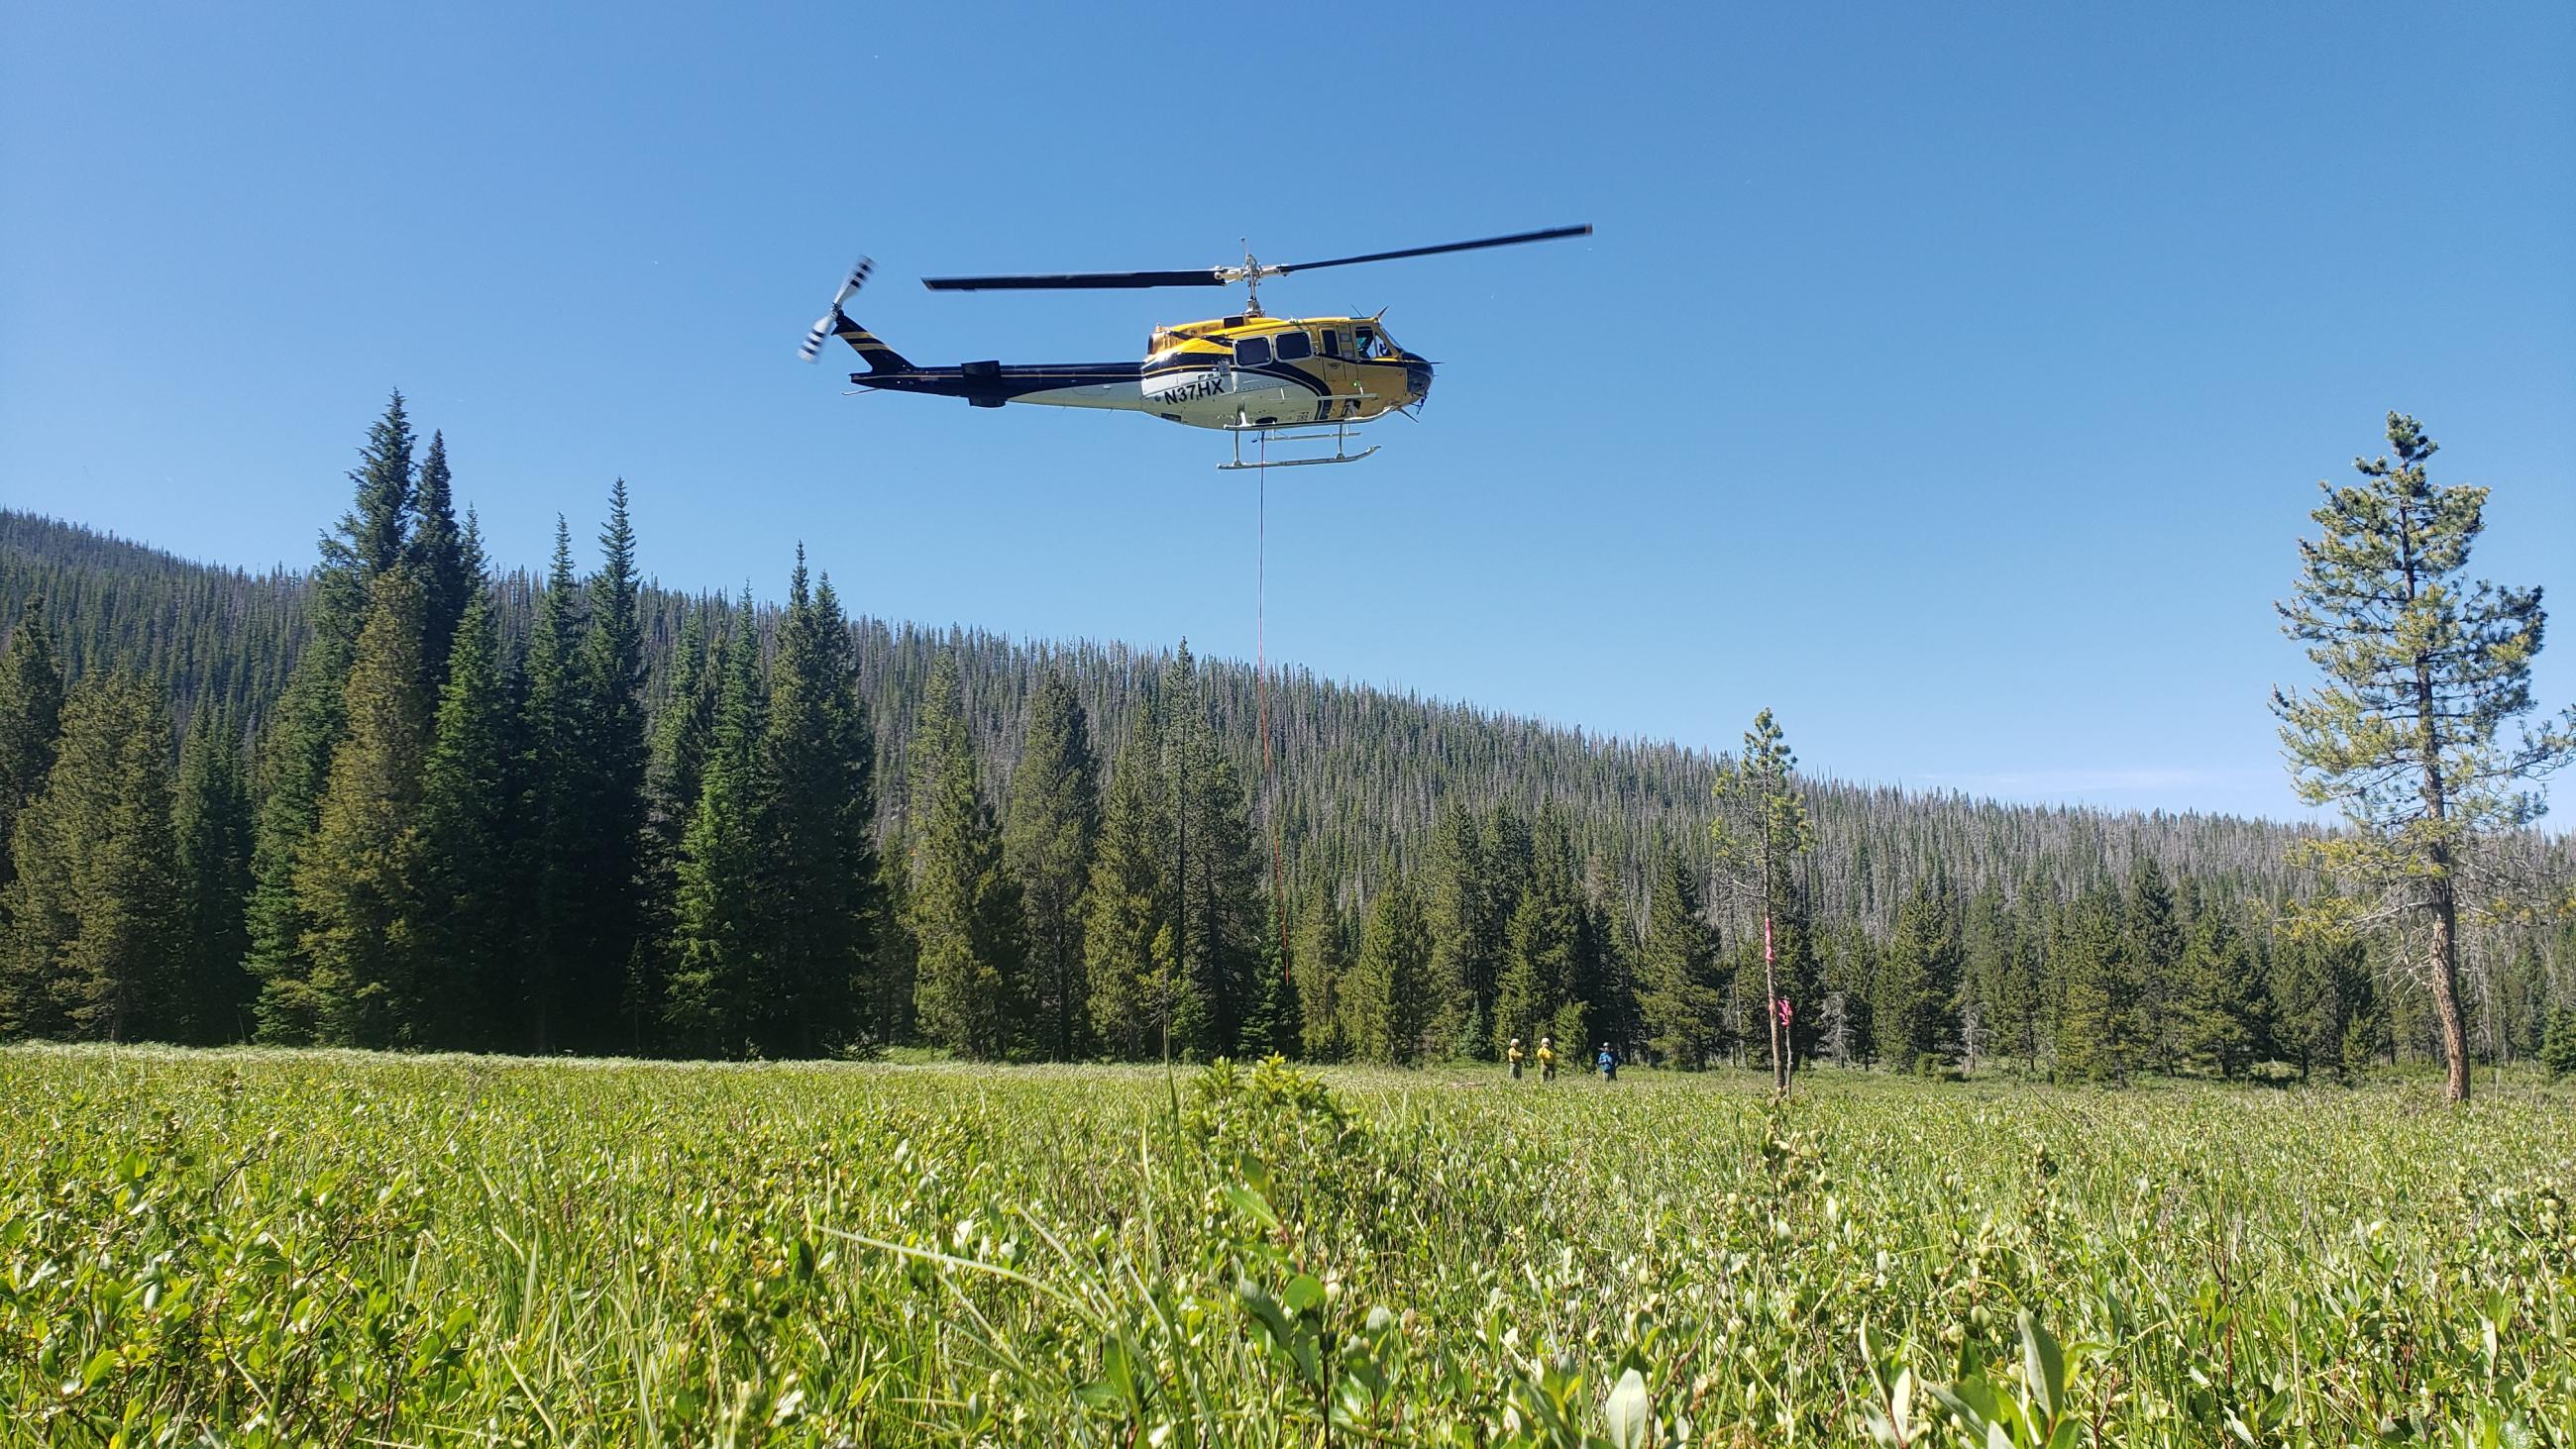 Picture shows a Bell 205 helicopter in the air. Flying over a green meadow with firefighters in the field below. 